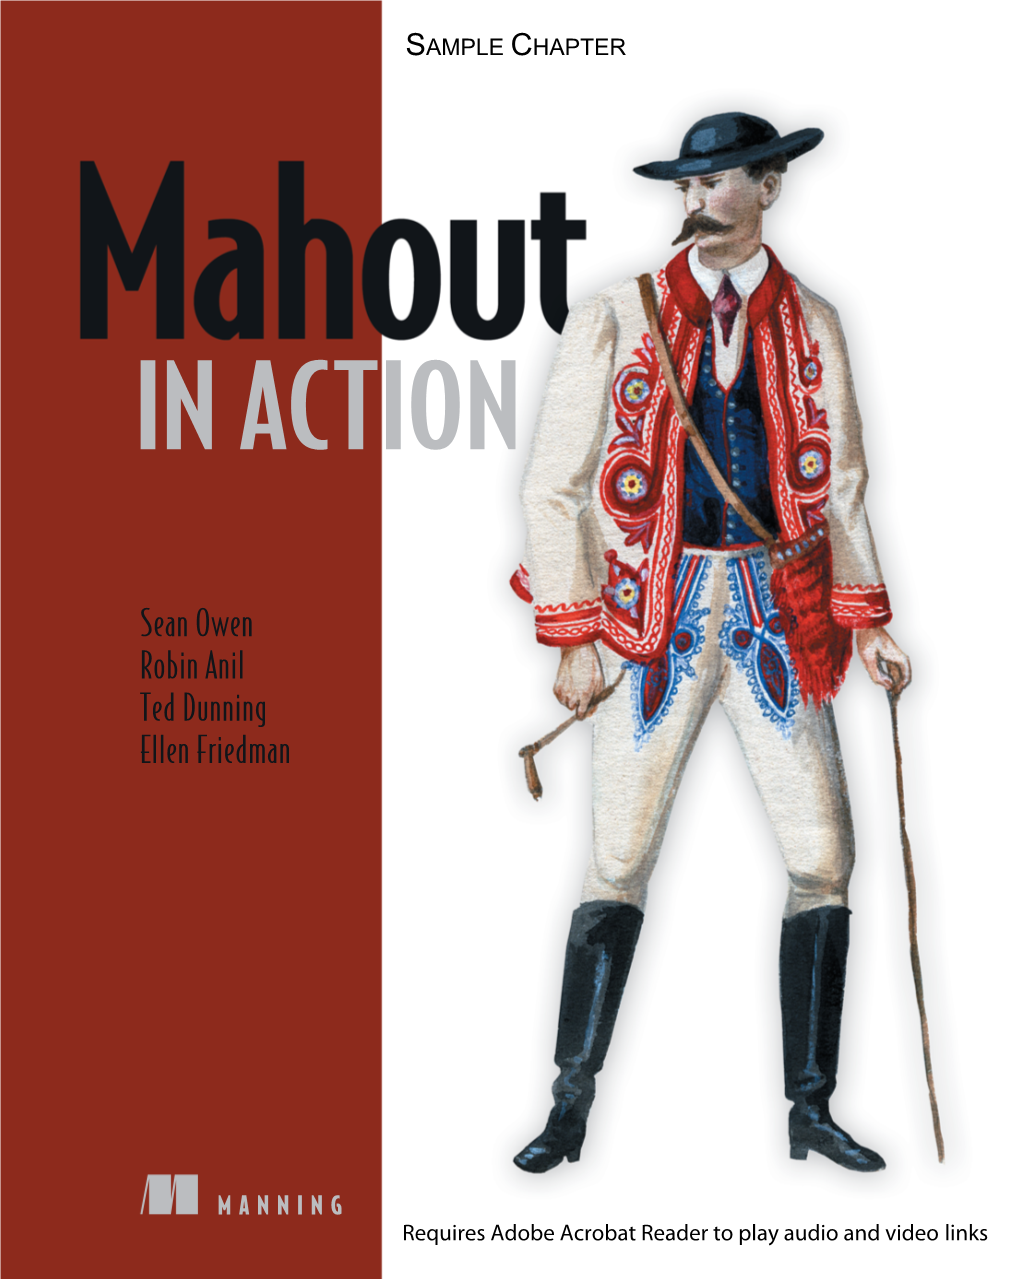 Mahout in Action by Sean Owen Robin Anil Ted Dunning Ellen Friedman